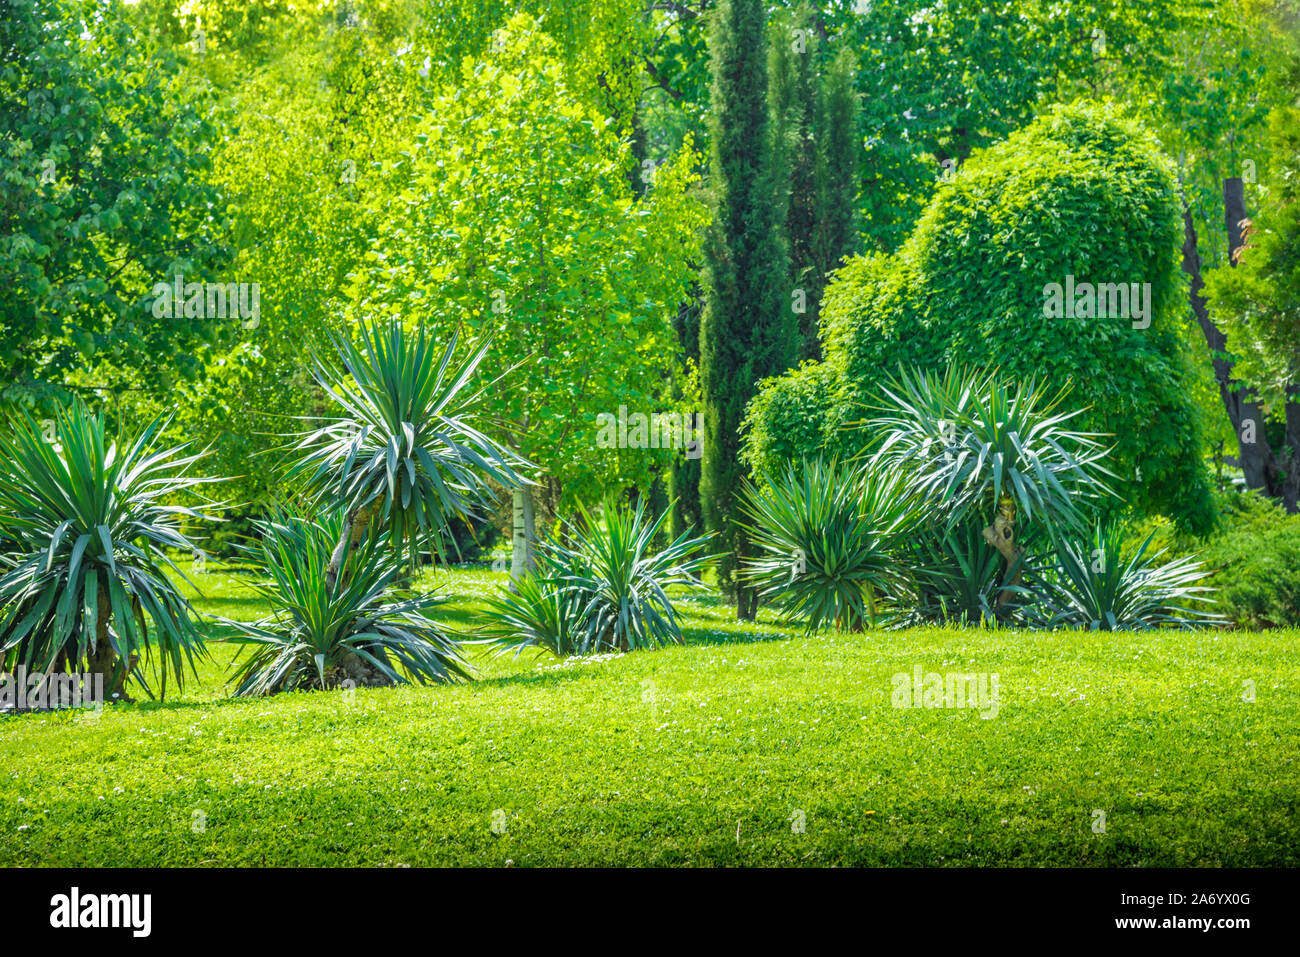 backyard and garden with manu trees and grass on lawn Stock Photo